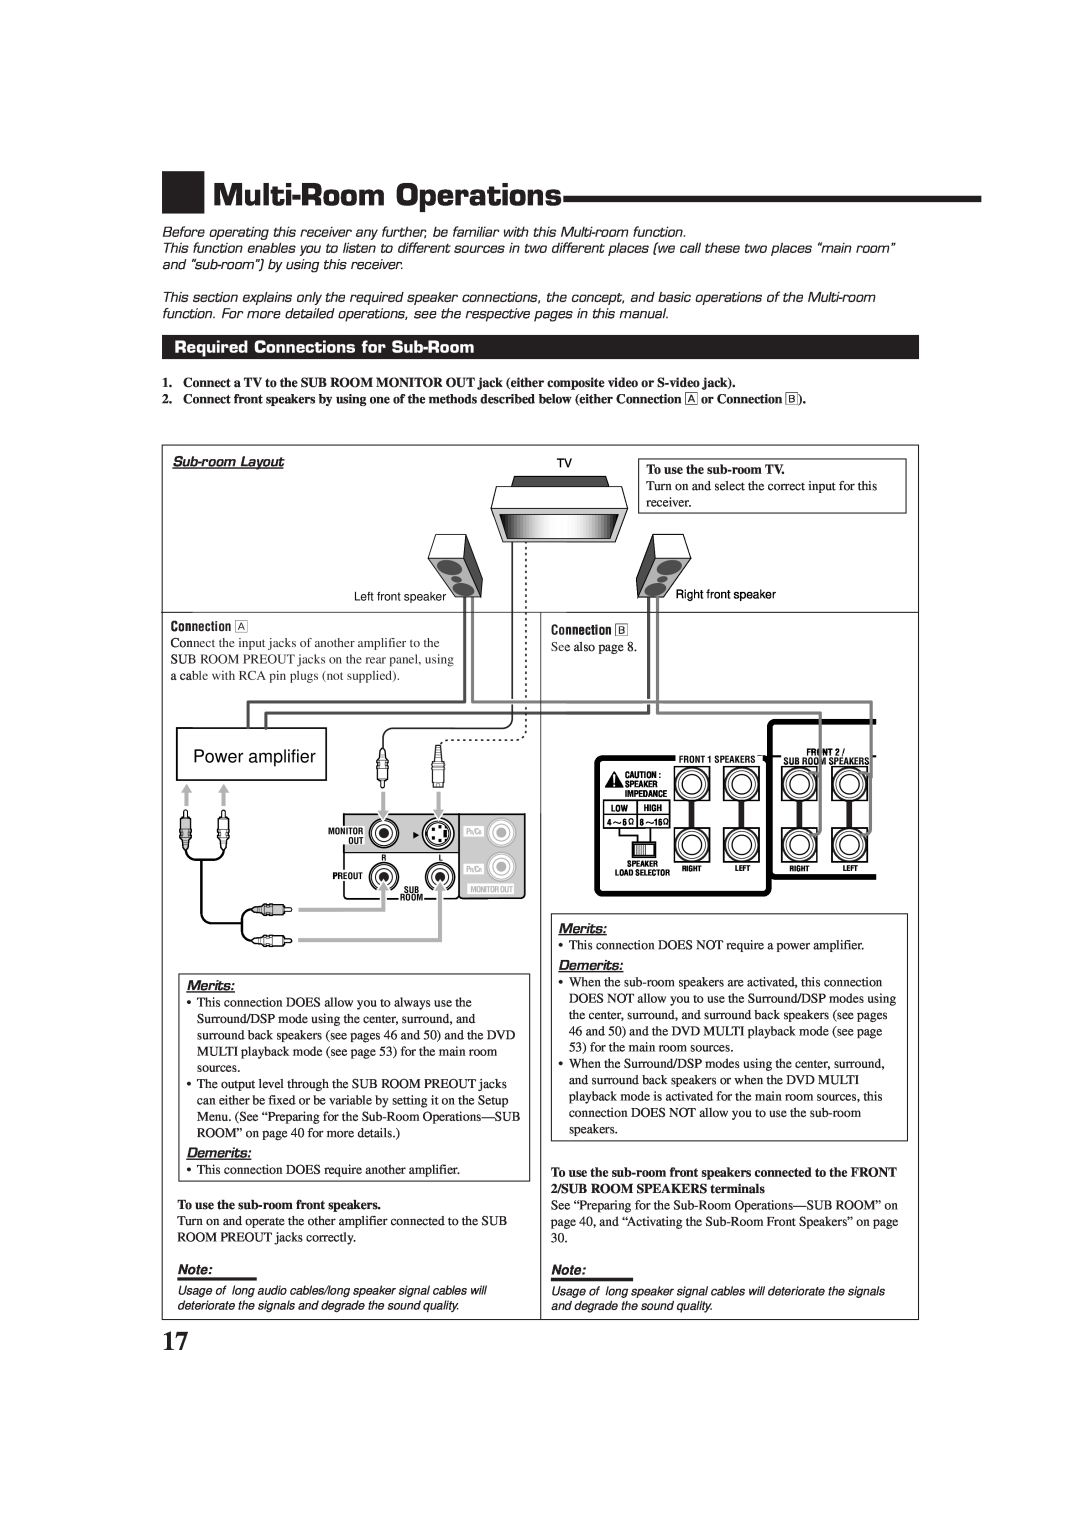 JVC RX-DP10VBK Multi-RoomOperations, Required Connections for Sub-Room, Power amplifier, Sub-roomLayout, Connection • 